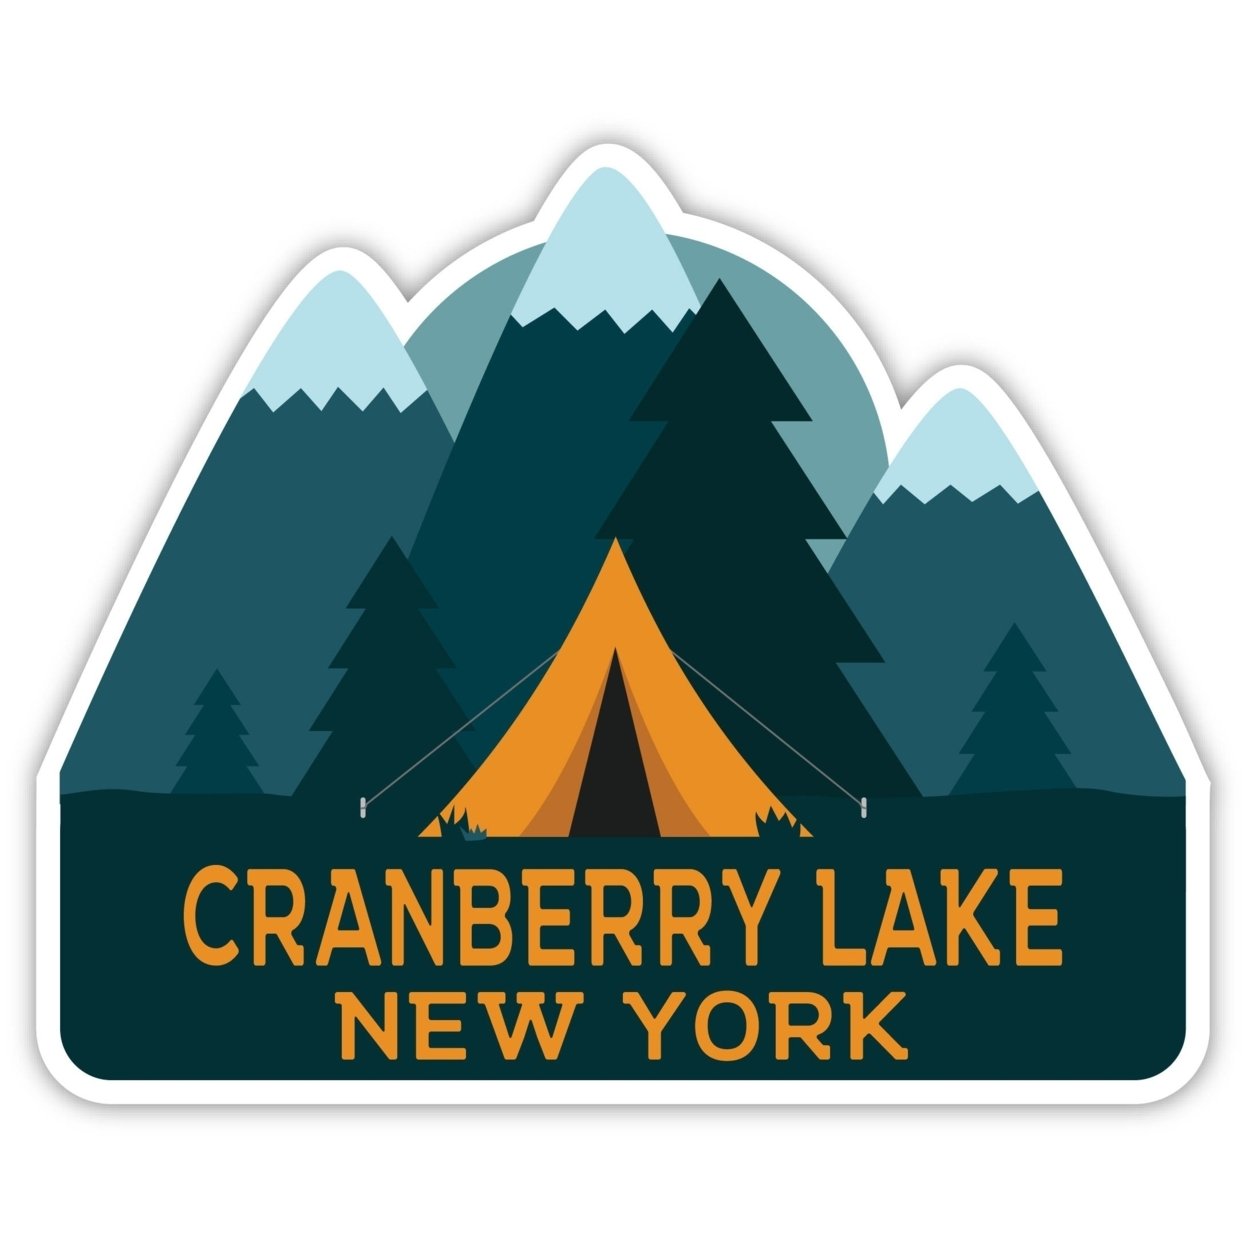 Cranberry Lake New York Souvenir Decorative Stickers (Choose Theme And Size) - 4-Pack, 8-Inch, Camp Life